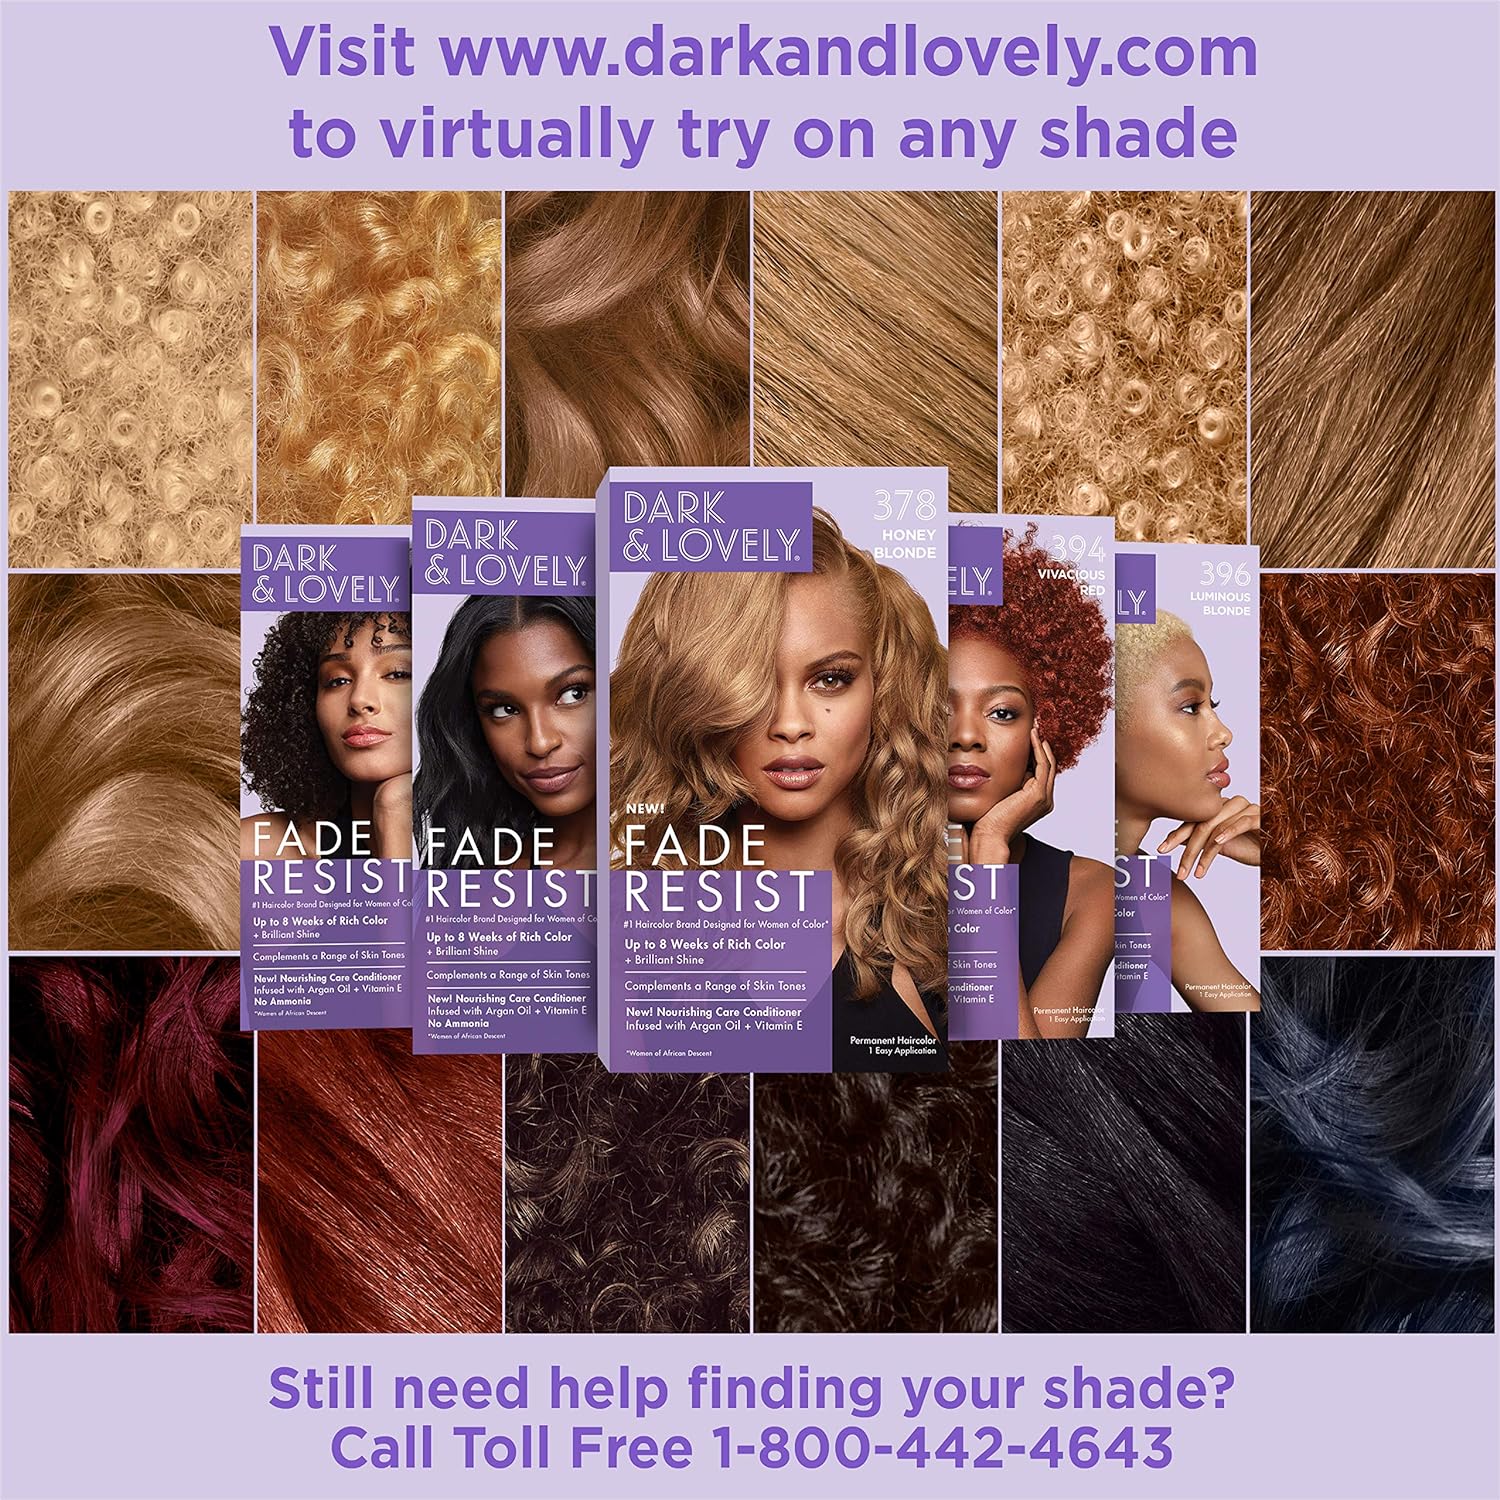 SoftSheen-Carson Dark and Lovely Fade Resist Rich Conditioning Hair Color, Permanent Hair Color, Up To 100 percent Gray Coverage, Brilliant Shine with Argan Oil and Vitamin E, Red Hot Rhythm : Chemical Hair Dyes : Beauty & Personal Care